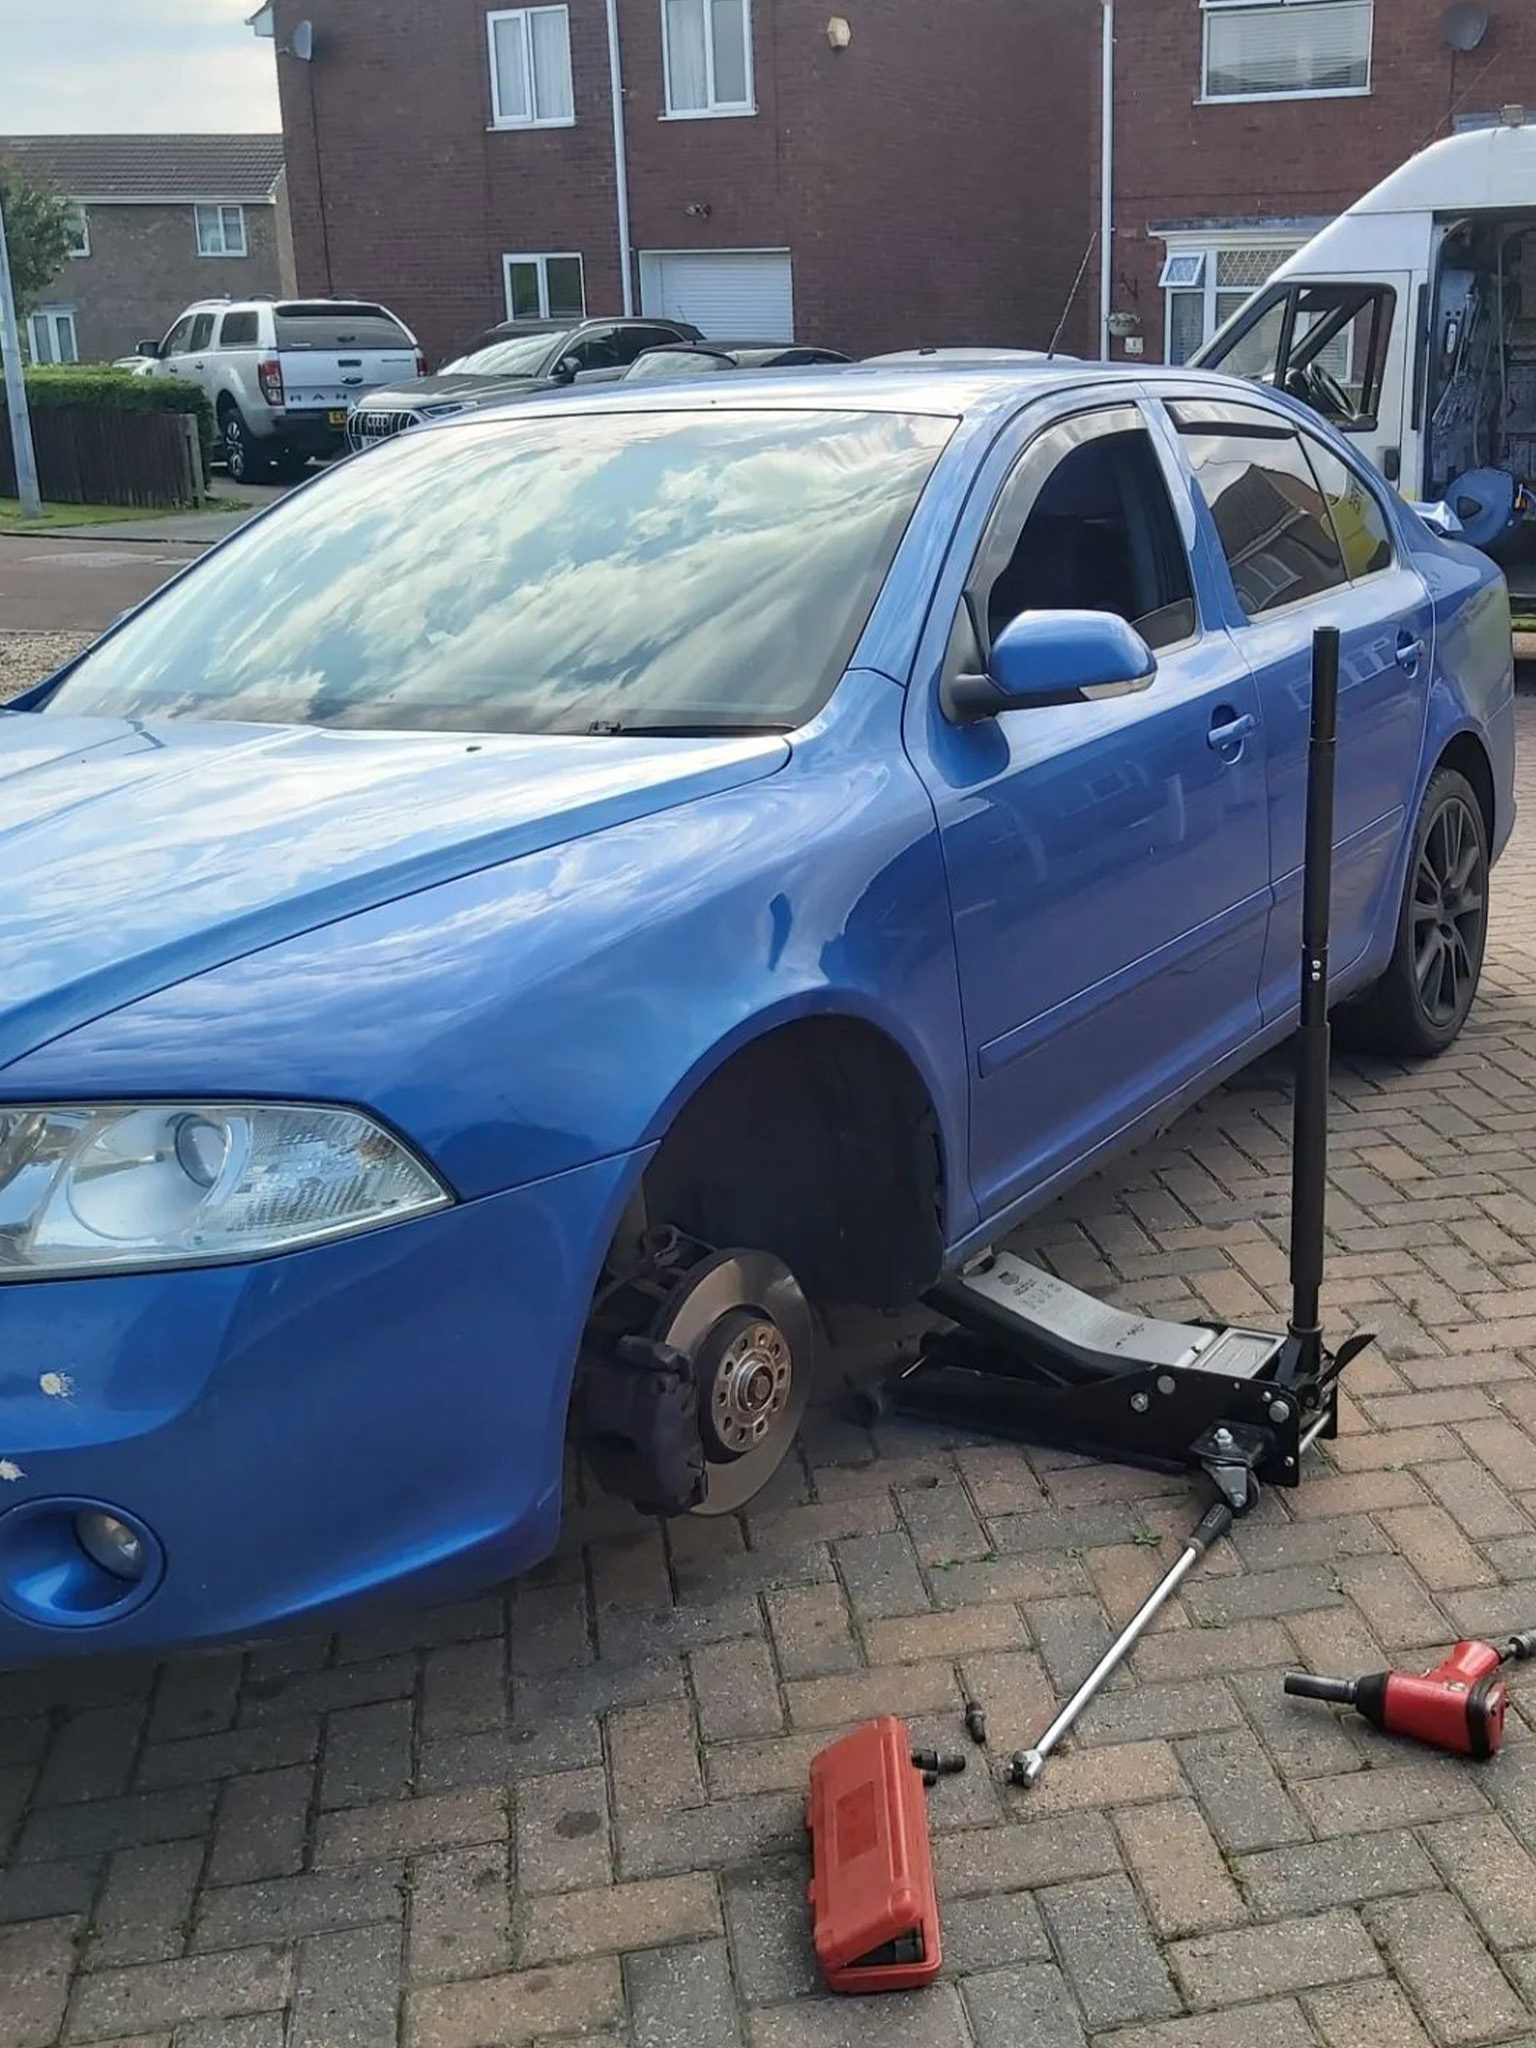 mobile tyre repairs & replacements